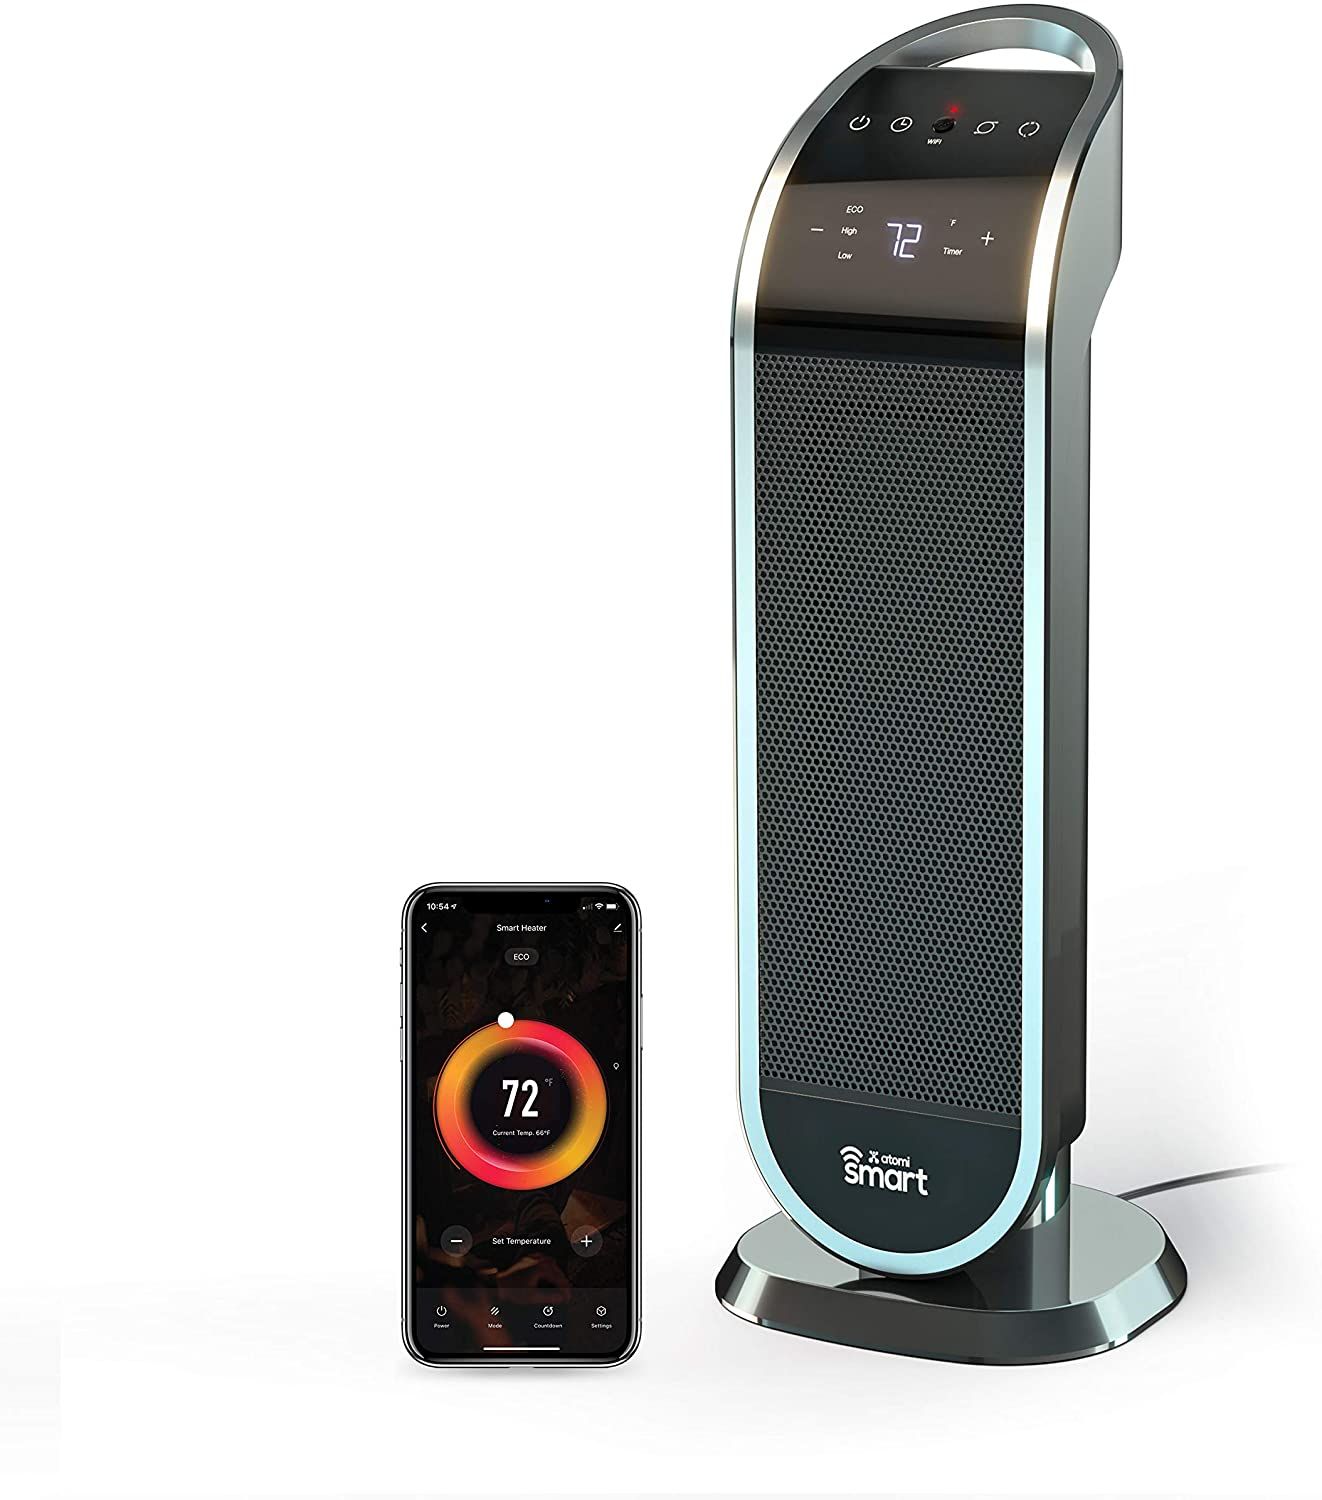 An image showing the Atomi portable space heater